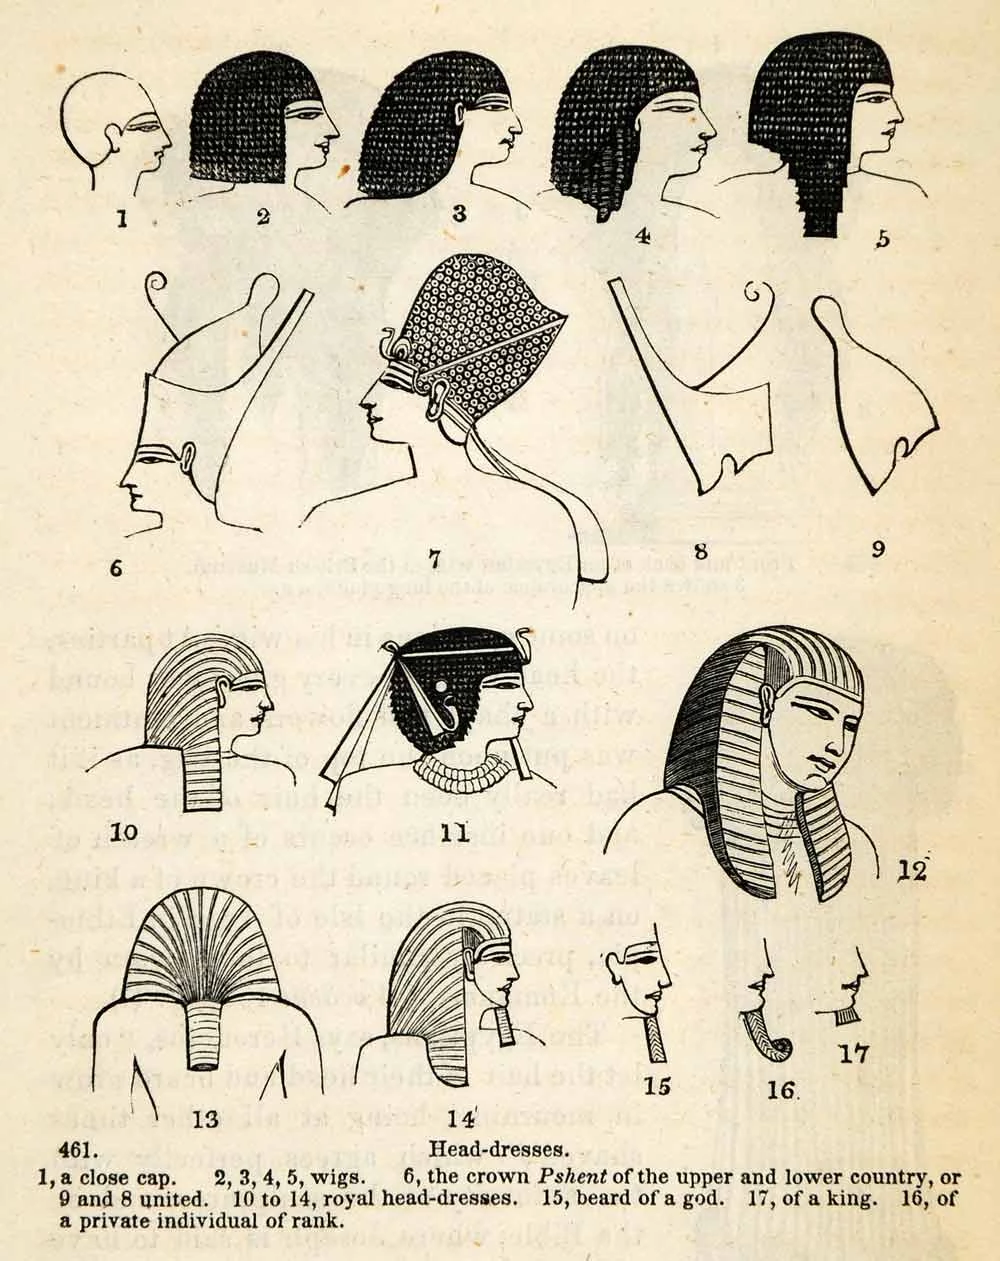 What did pharaohs wear on their heads